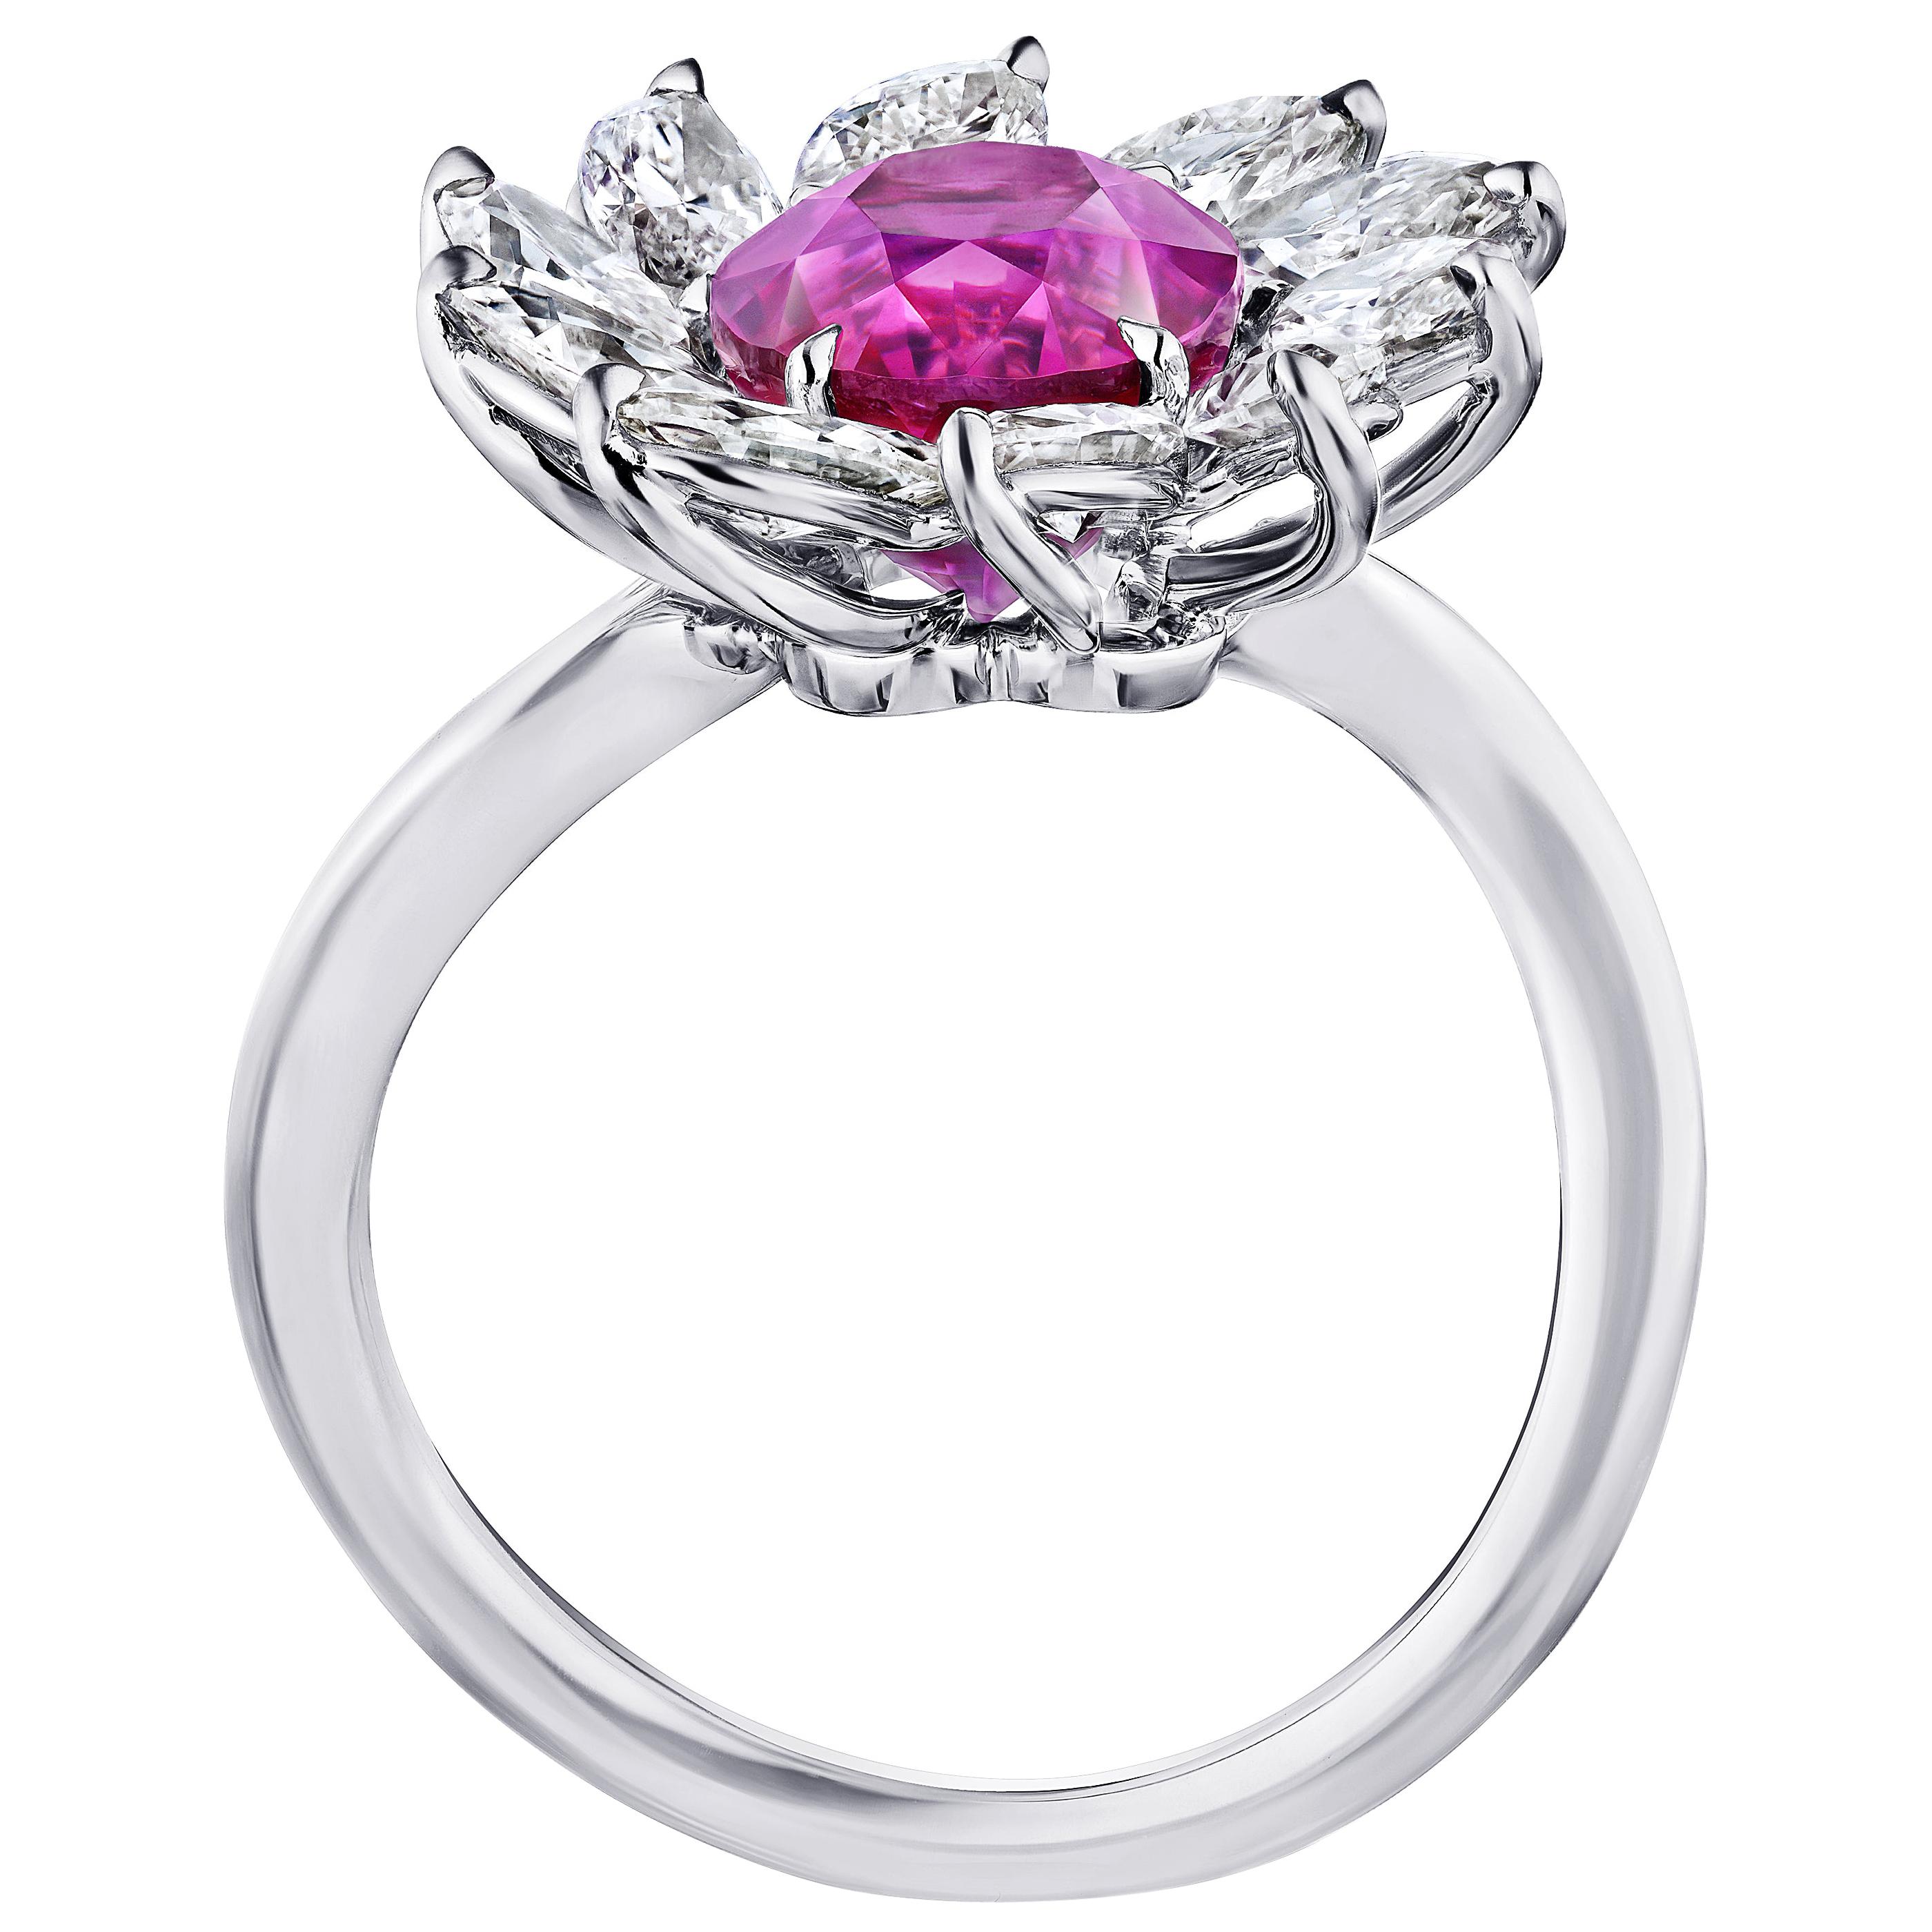 4.10 carat oval red ruby with ten marquise diamonds 2.18 carats set in a platinum ring Size 7.
